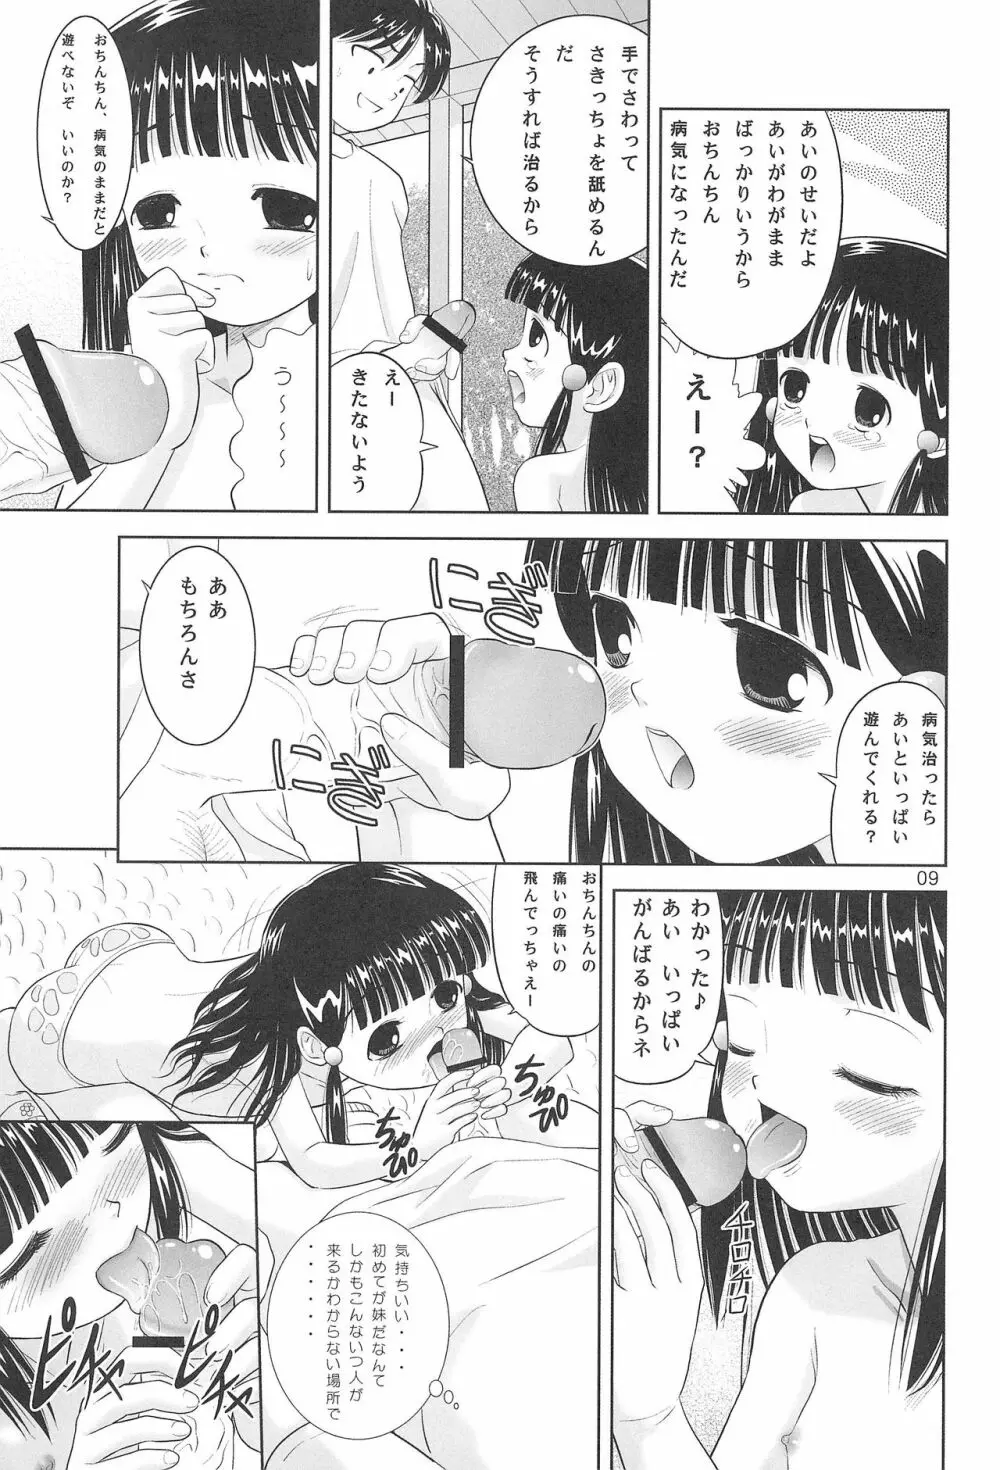 Little Lovers 6 - 水辺の少女 Page.8